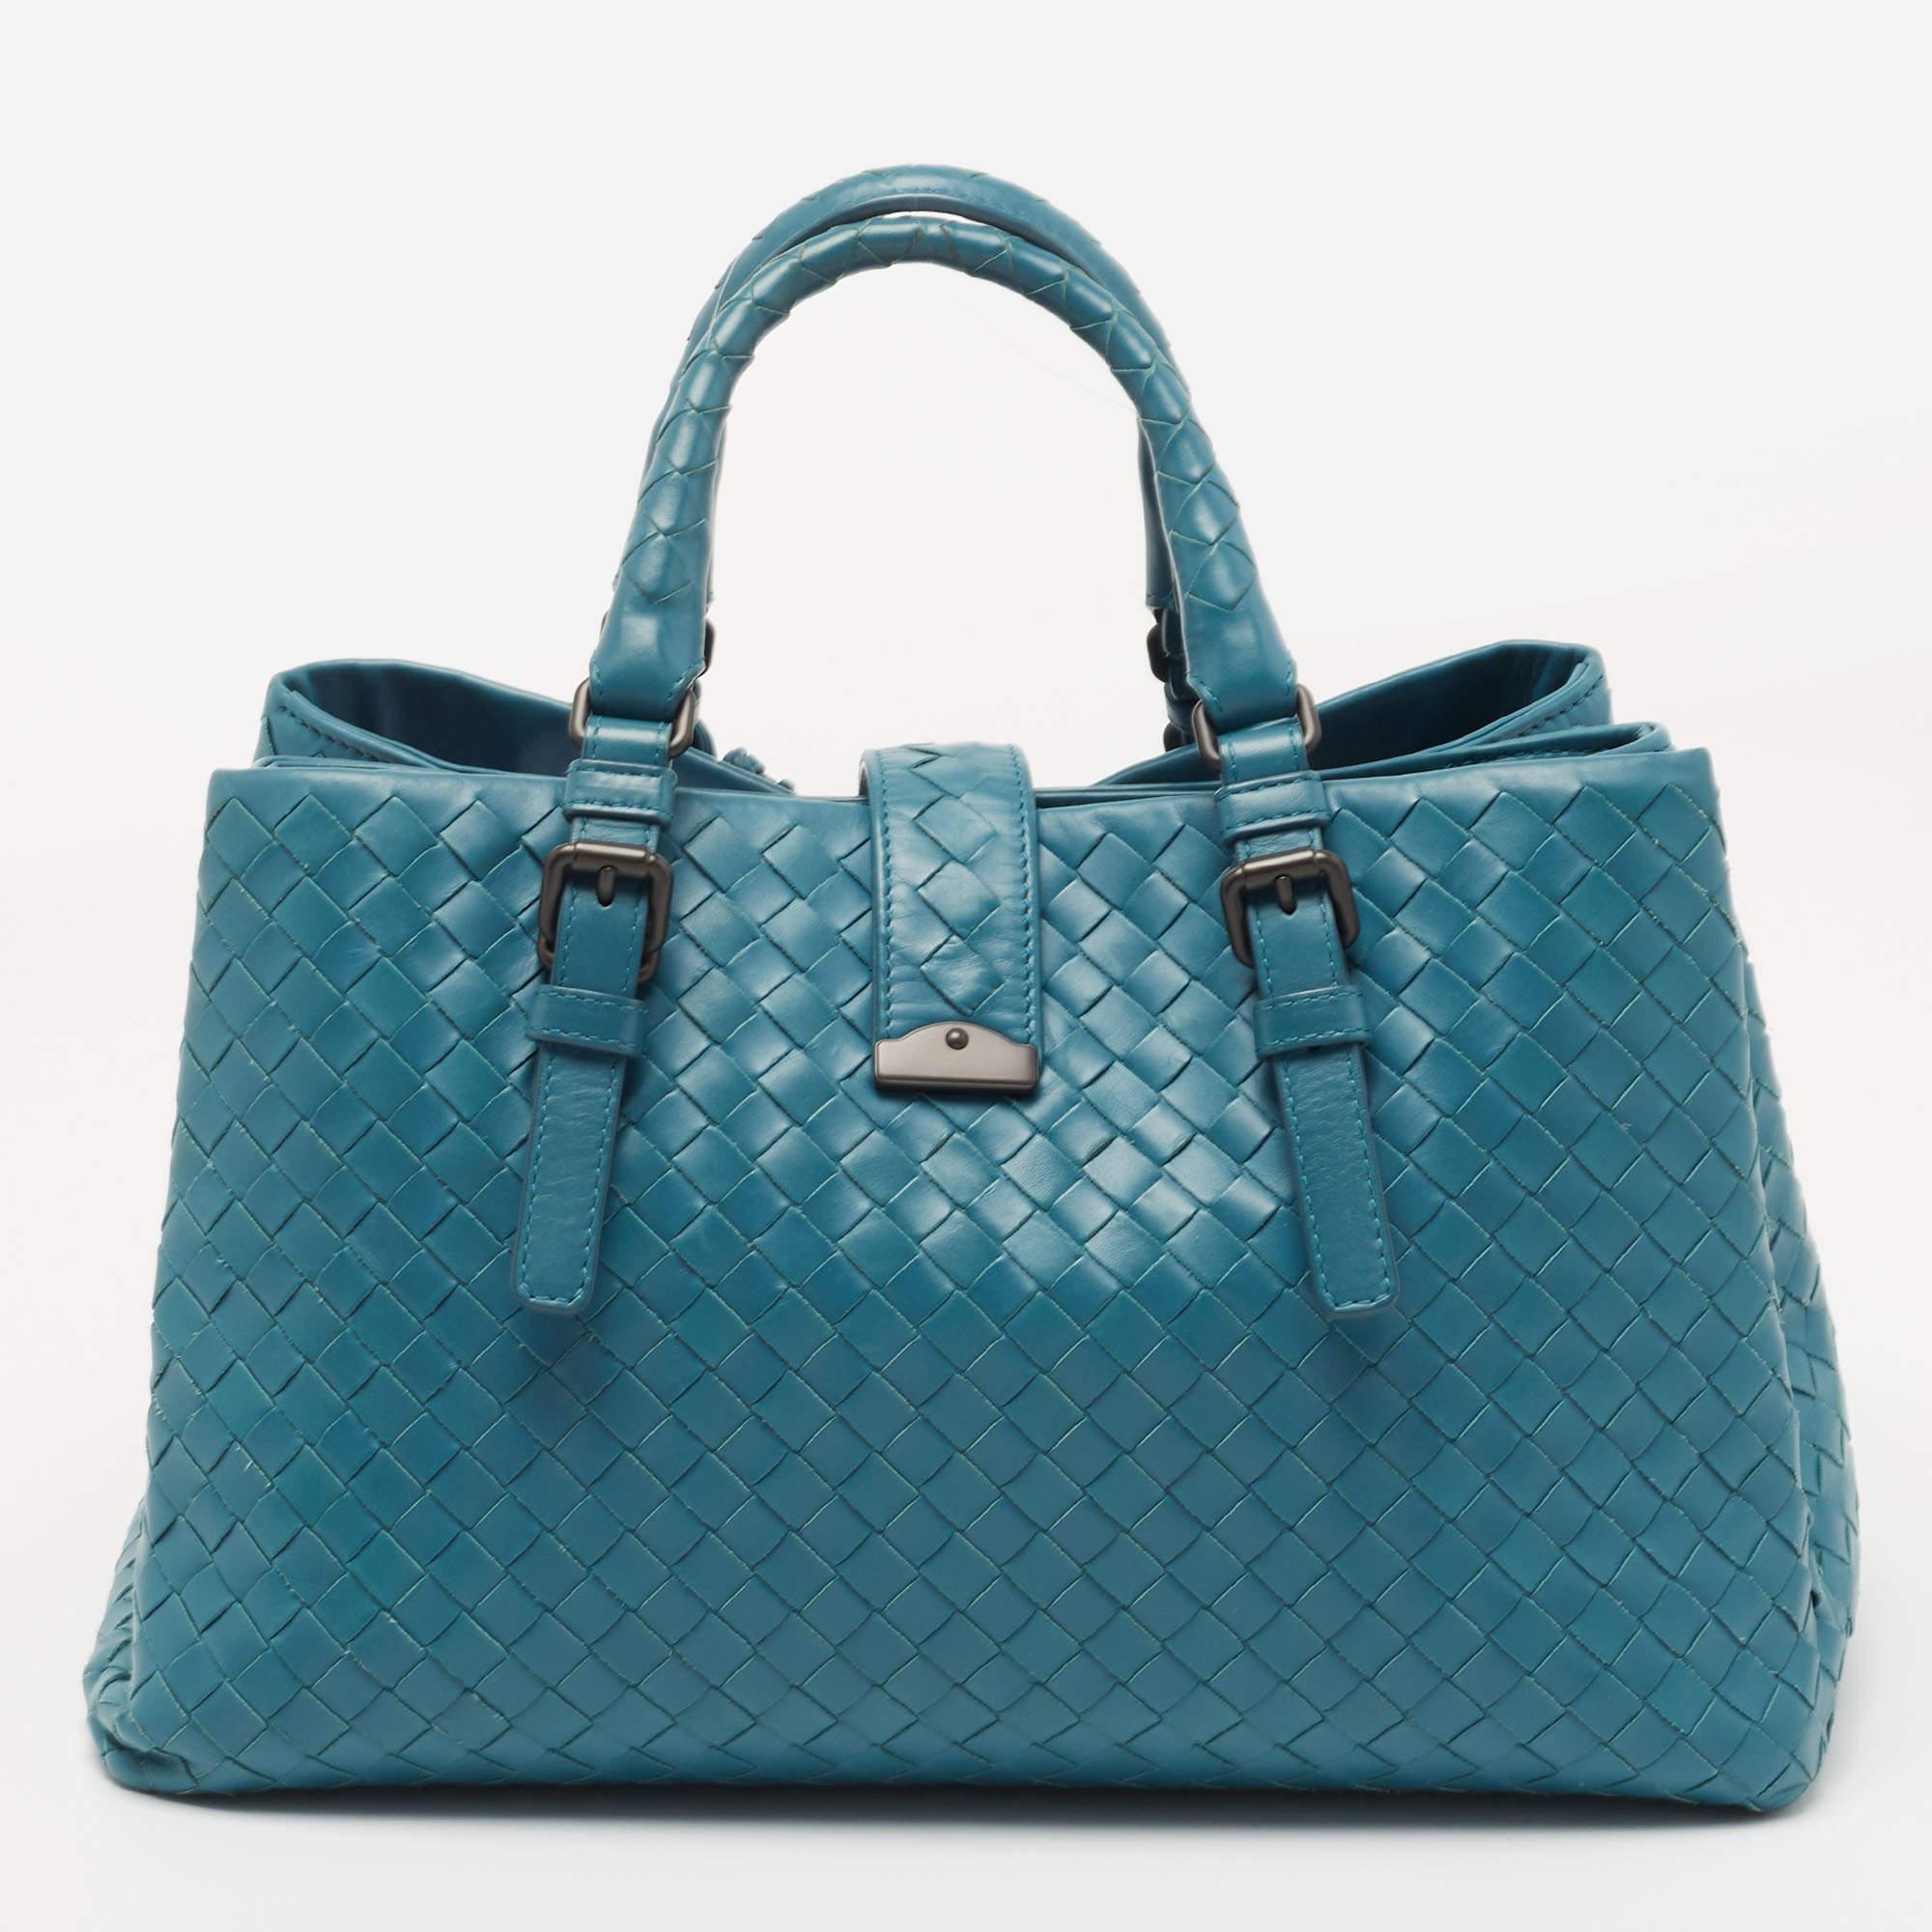 Bottega Veneta's Roma tote is a timeless addition to your accessory edit. The bag is beautifully woven using the Intrecciato technique that strengthens the leather. This blue-hued creation opens to roomy suede compartments. The creation is finished